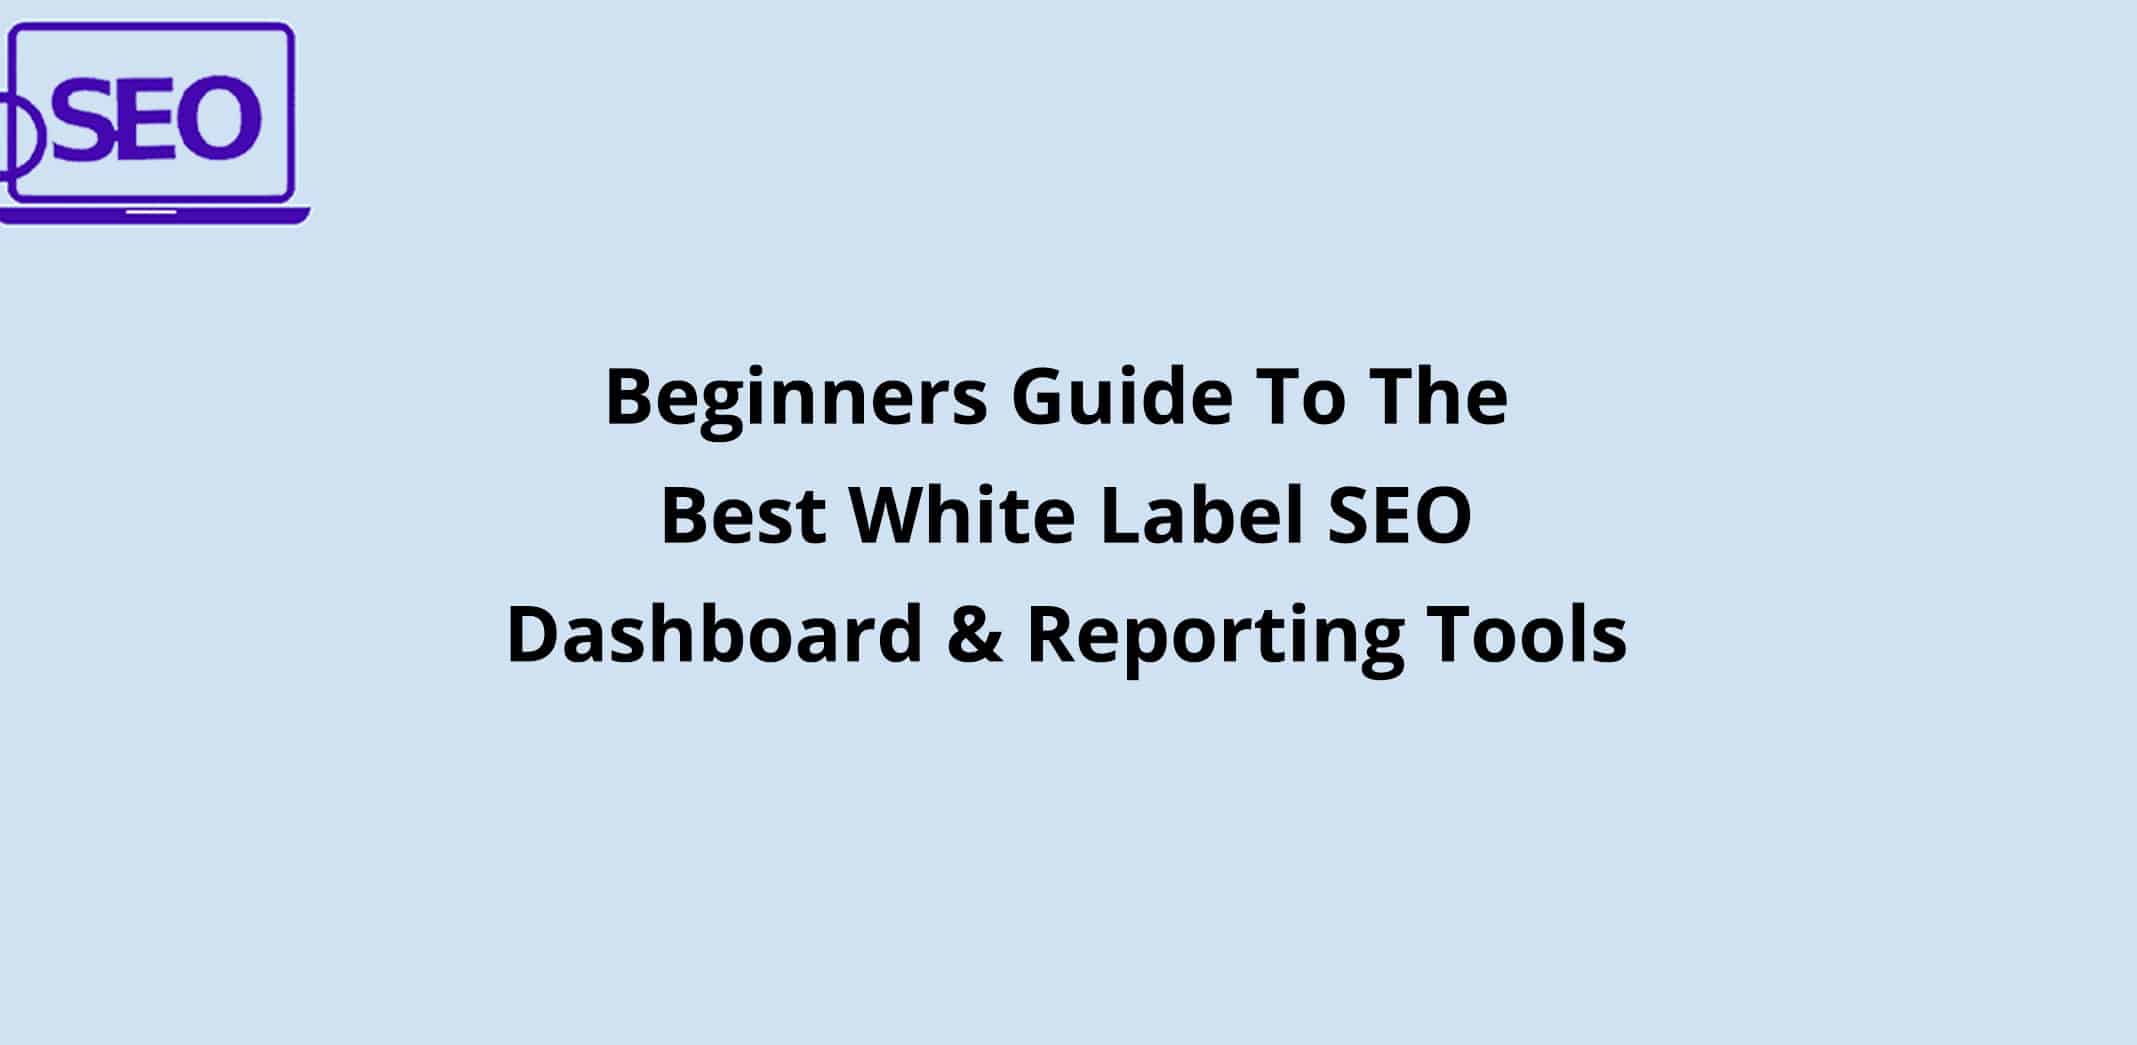 Beginner’s Guide to Best White Label SEO Dashboard Reporting Tools in 2021